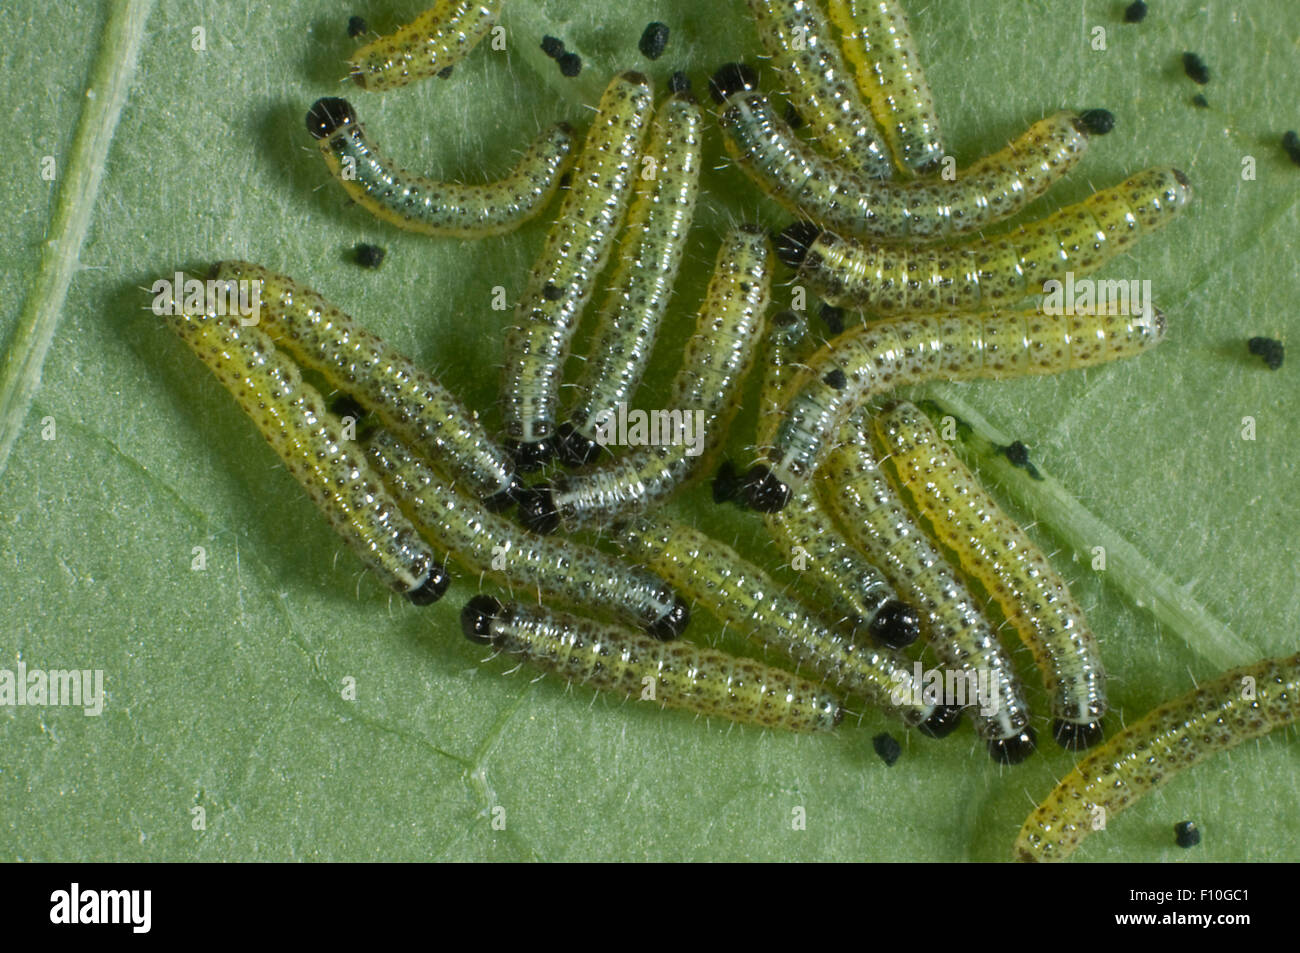 Large or cabbage white butterfly, Pieris brassicae, early instar caterpillars on a nasturtium leaf Stock Photo